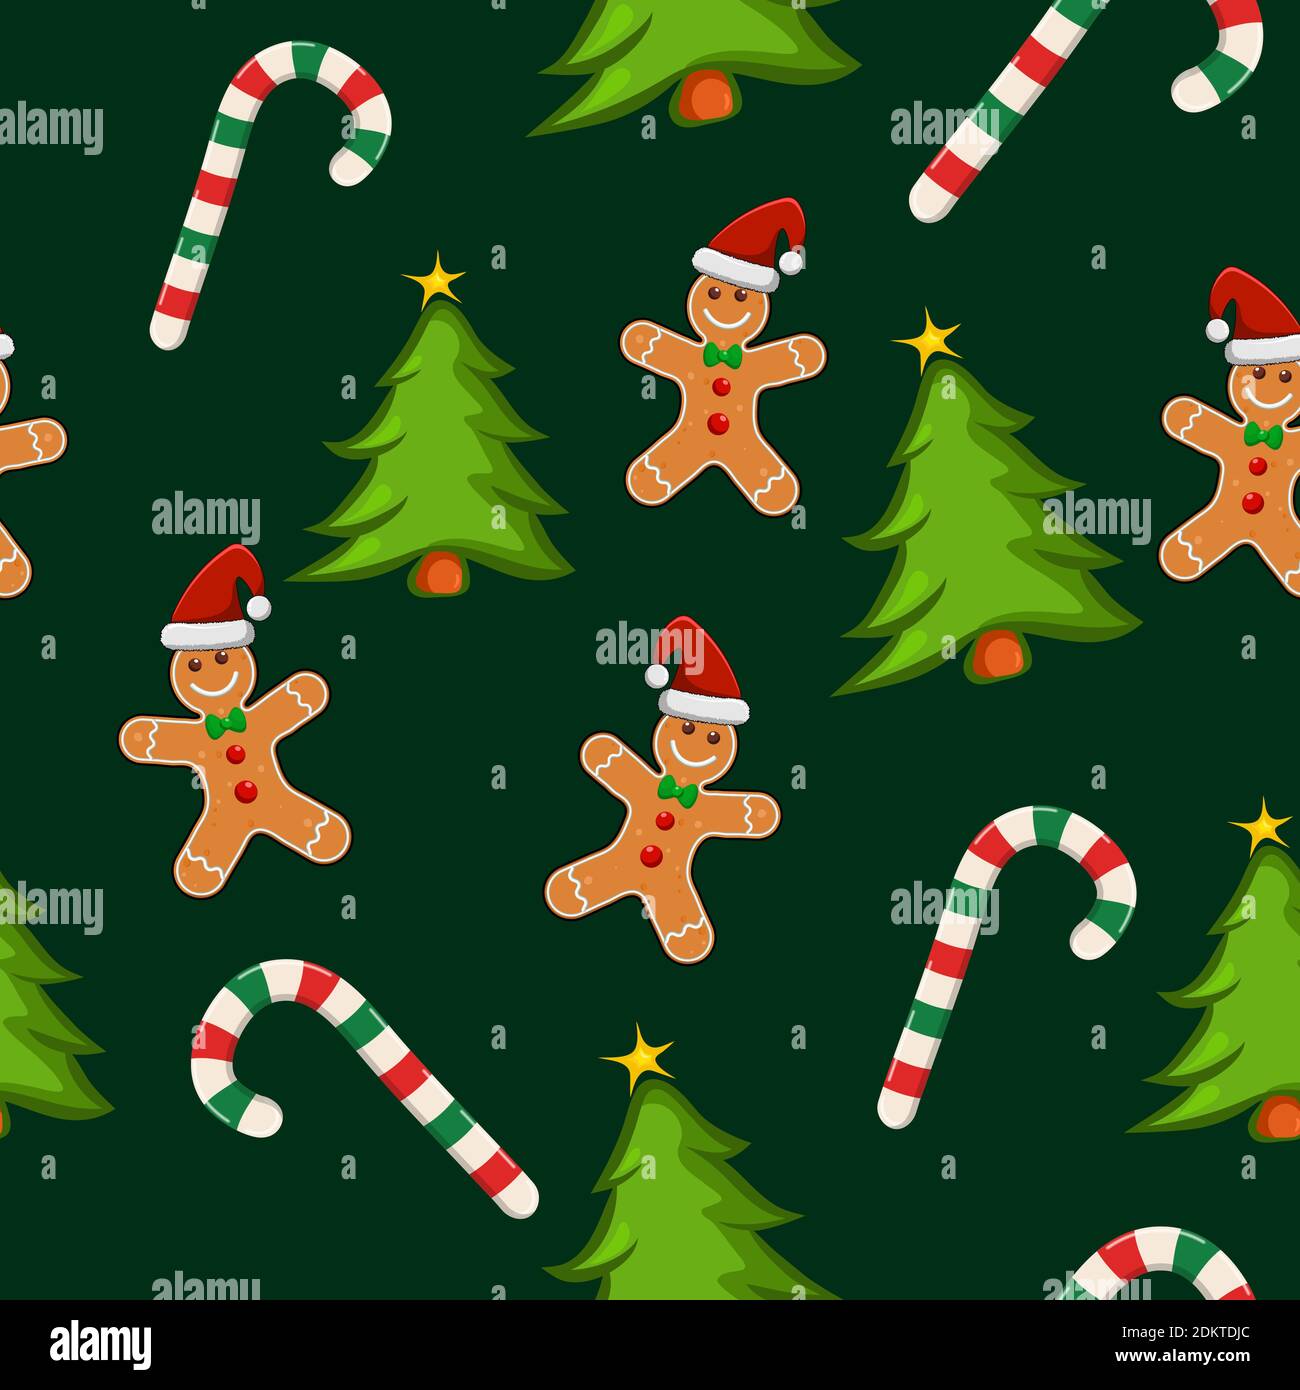 Gingerbread man seamless pattern tile. Christmas cookies cartoon on wrapping paper. Cute smiling character design element. Repeated vector background Stock Vector